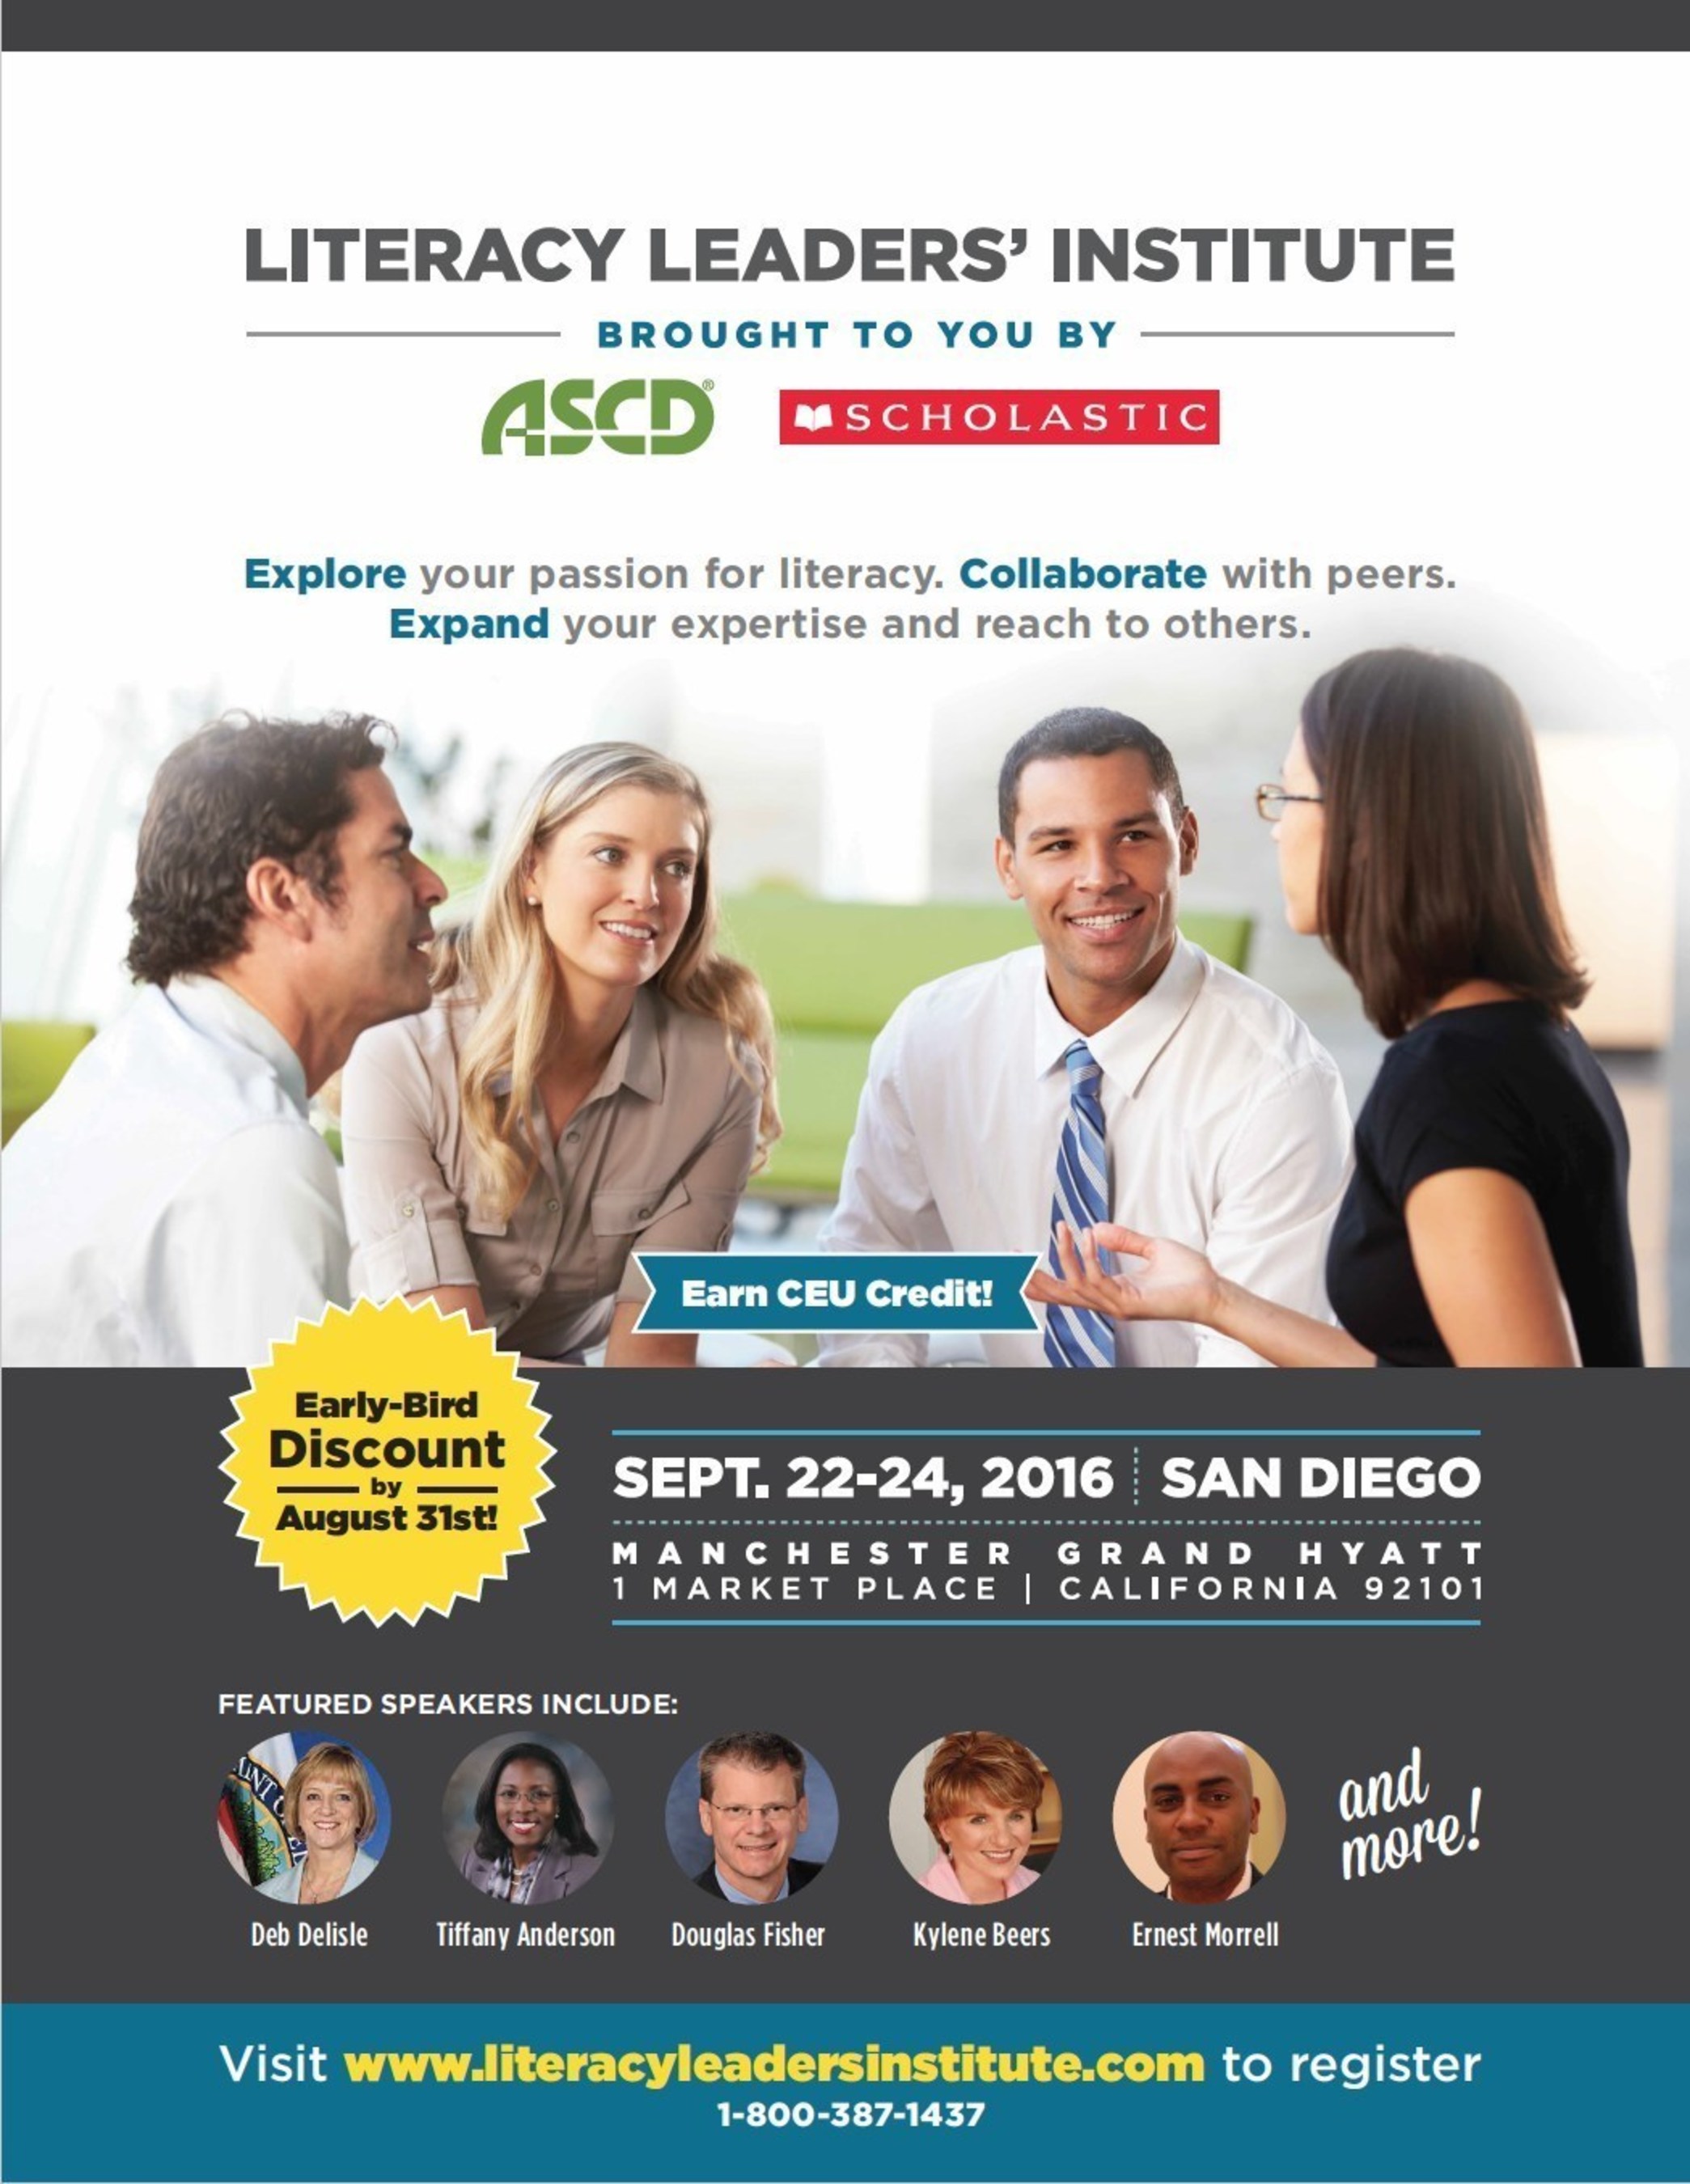 The inaugural, three-day Literacy Leaders' Institute, hosted by Scholastic and ASCD, begins September 22-24, 2016 in San Diego, CA.